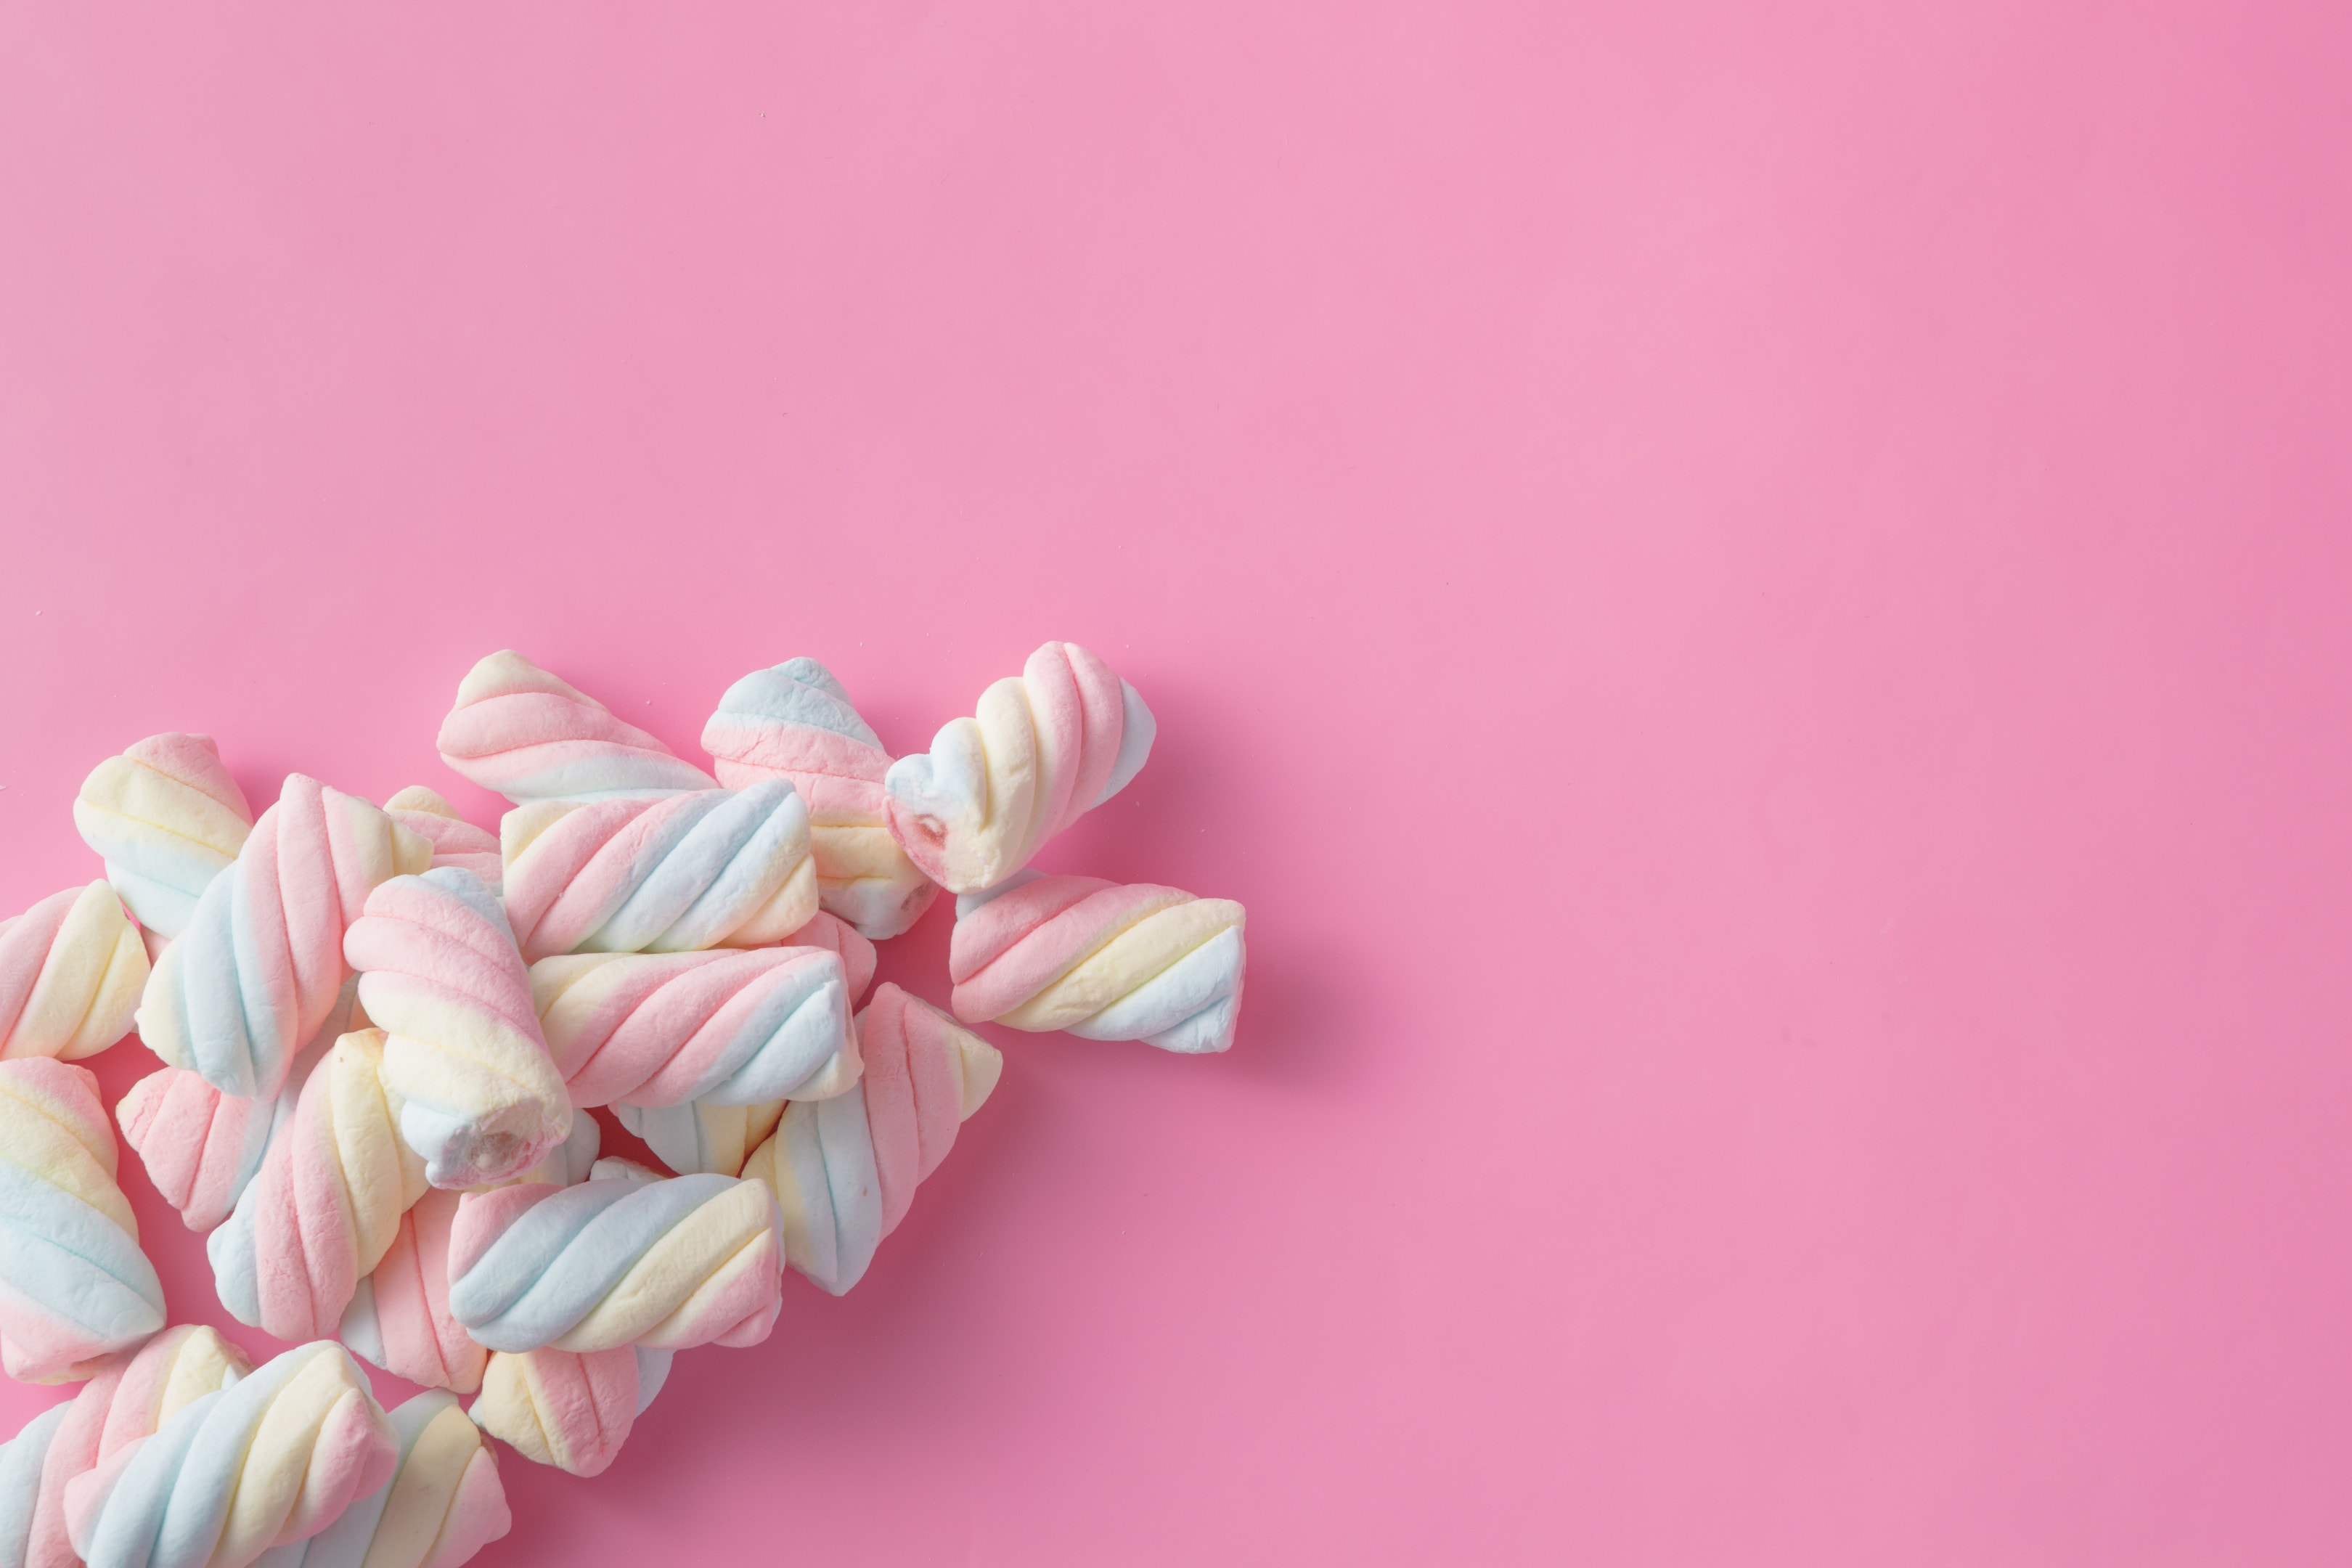 Colored twisted marshmallow on pink background